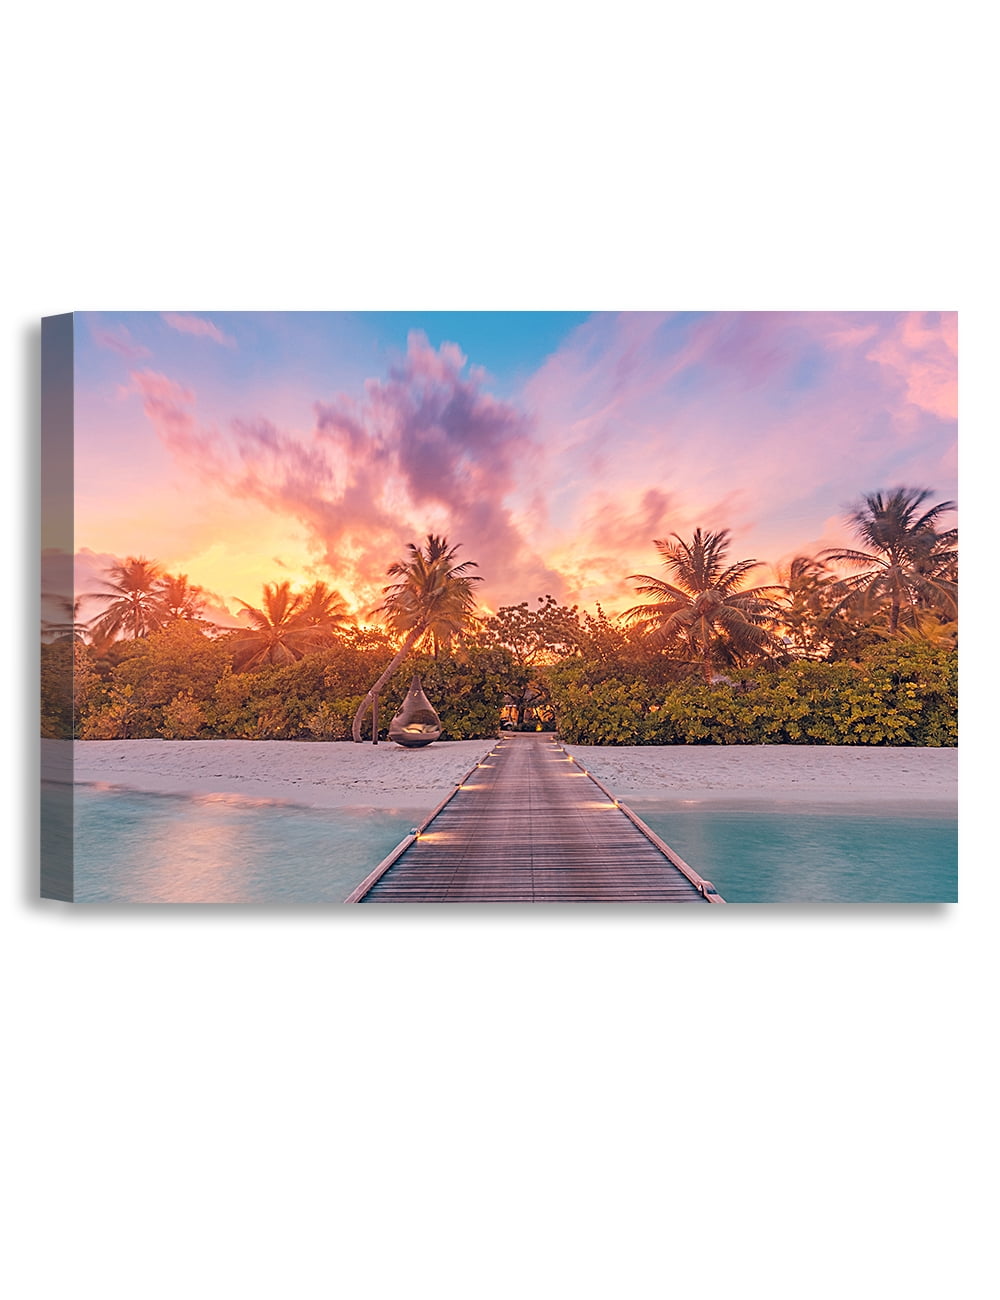 DecorArts Maldives, Sunset over Beach. Giclee Canvas Prints for Wall Decor.  30x20